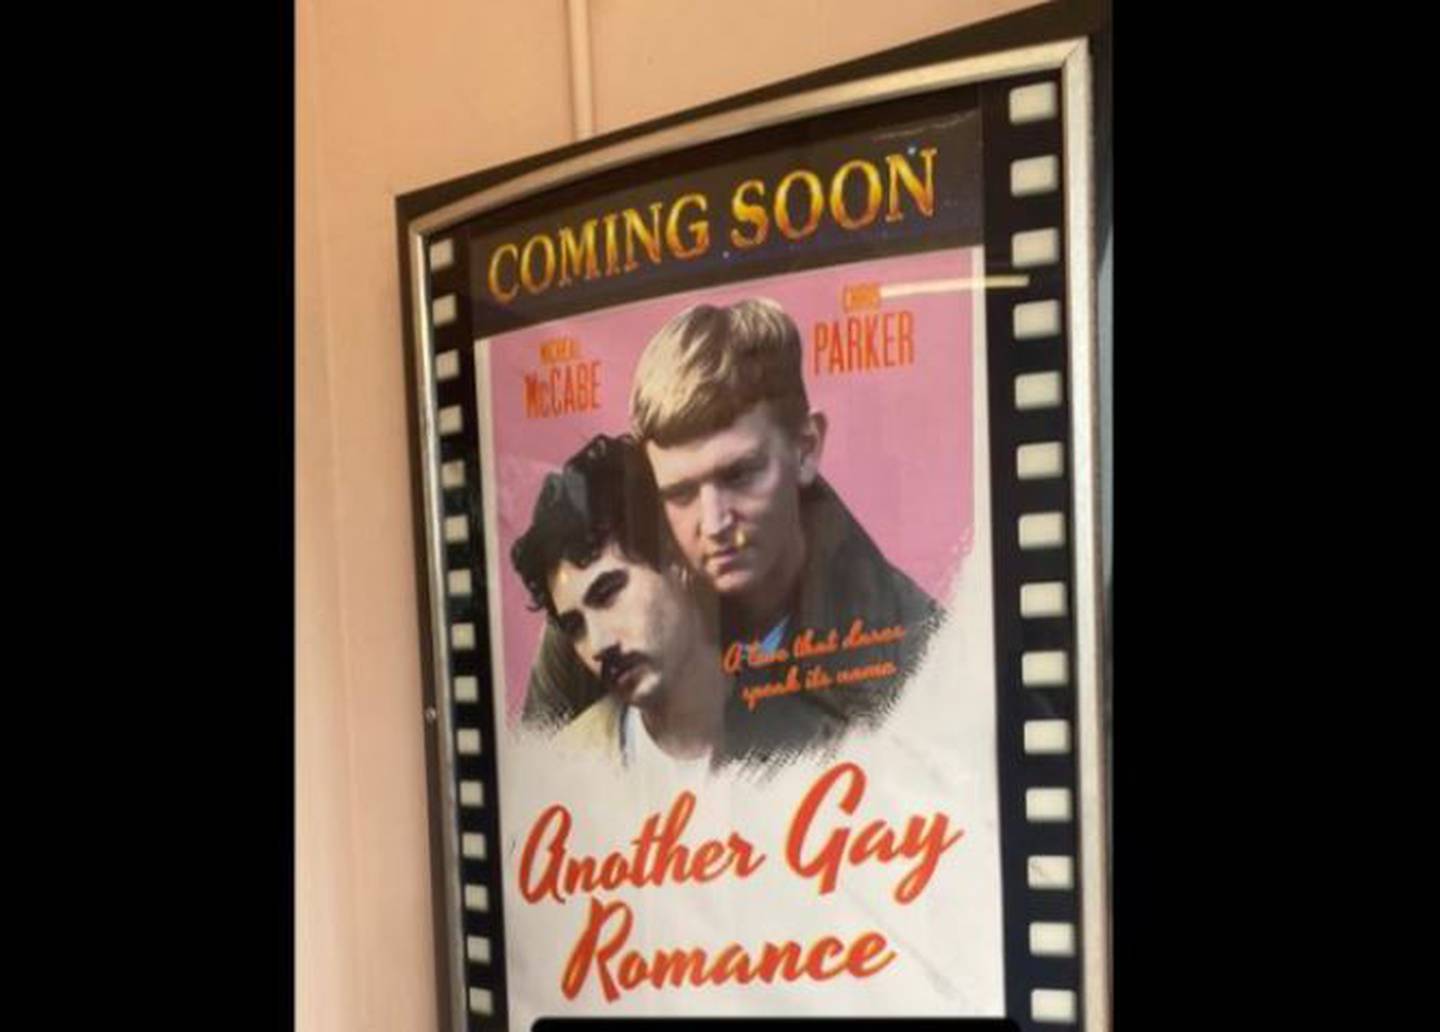 Chris Parker and his new husband, Micheal McCabe, in a mocked-up movie poster on display at The Hollywood